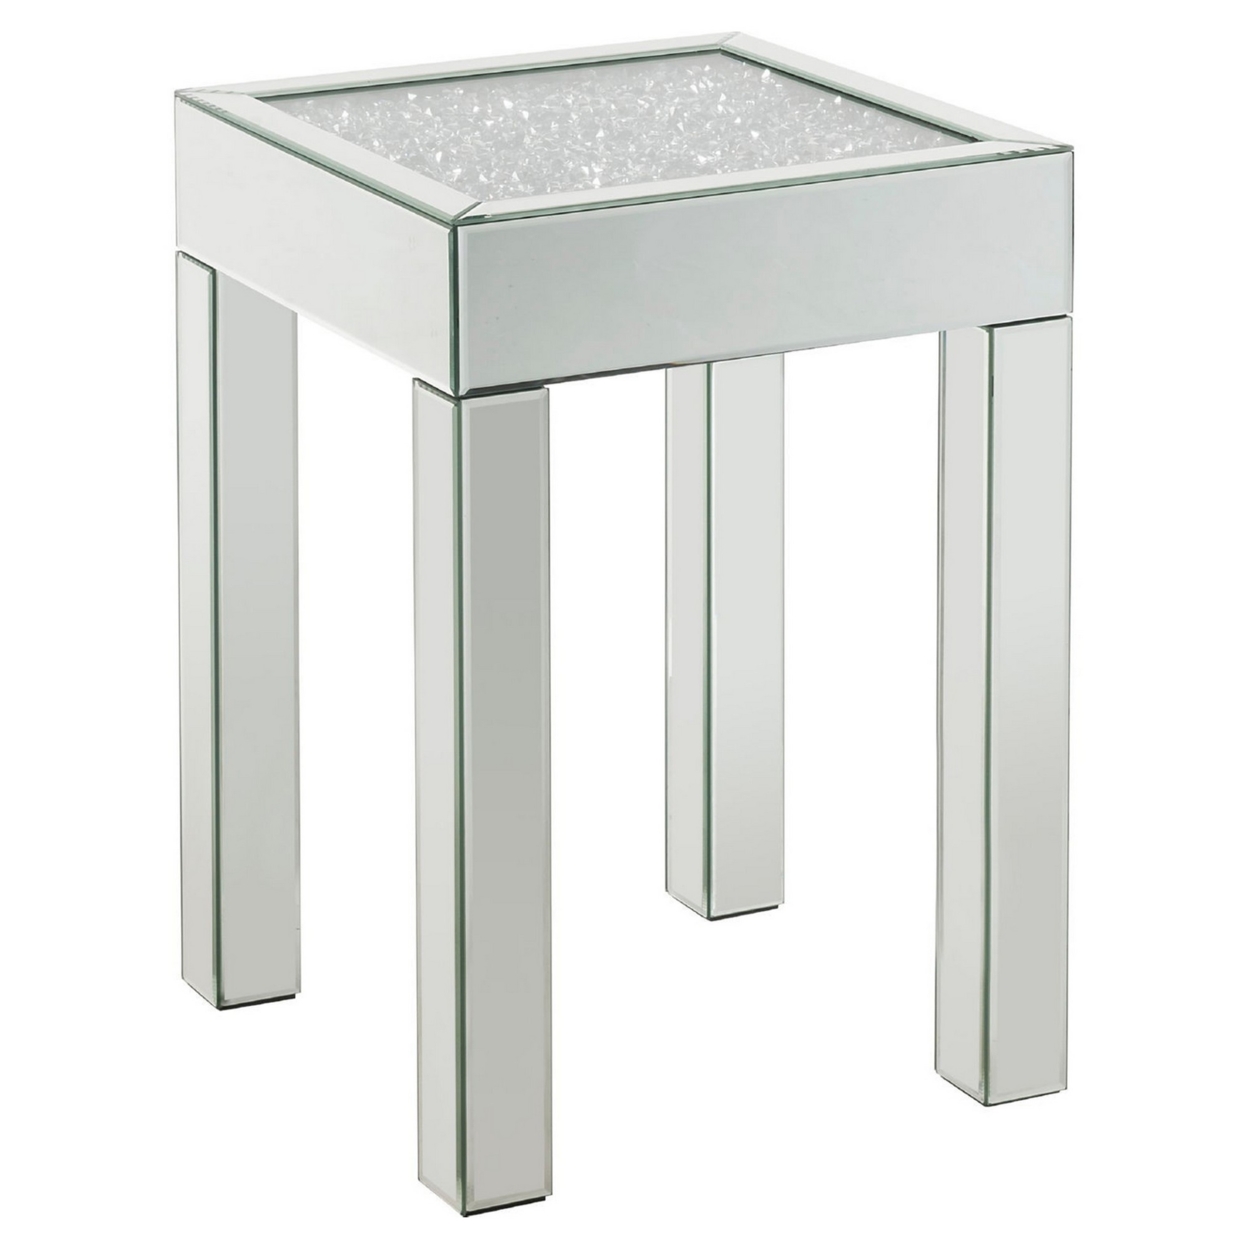 End Table With Faux Acrylic Diamond Top And Block Legs, Silver- Saltoro Sherpi